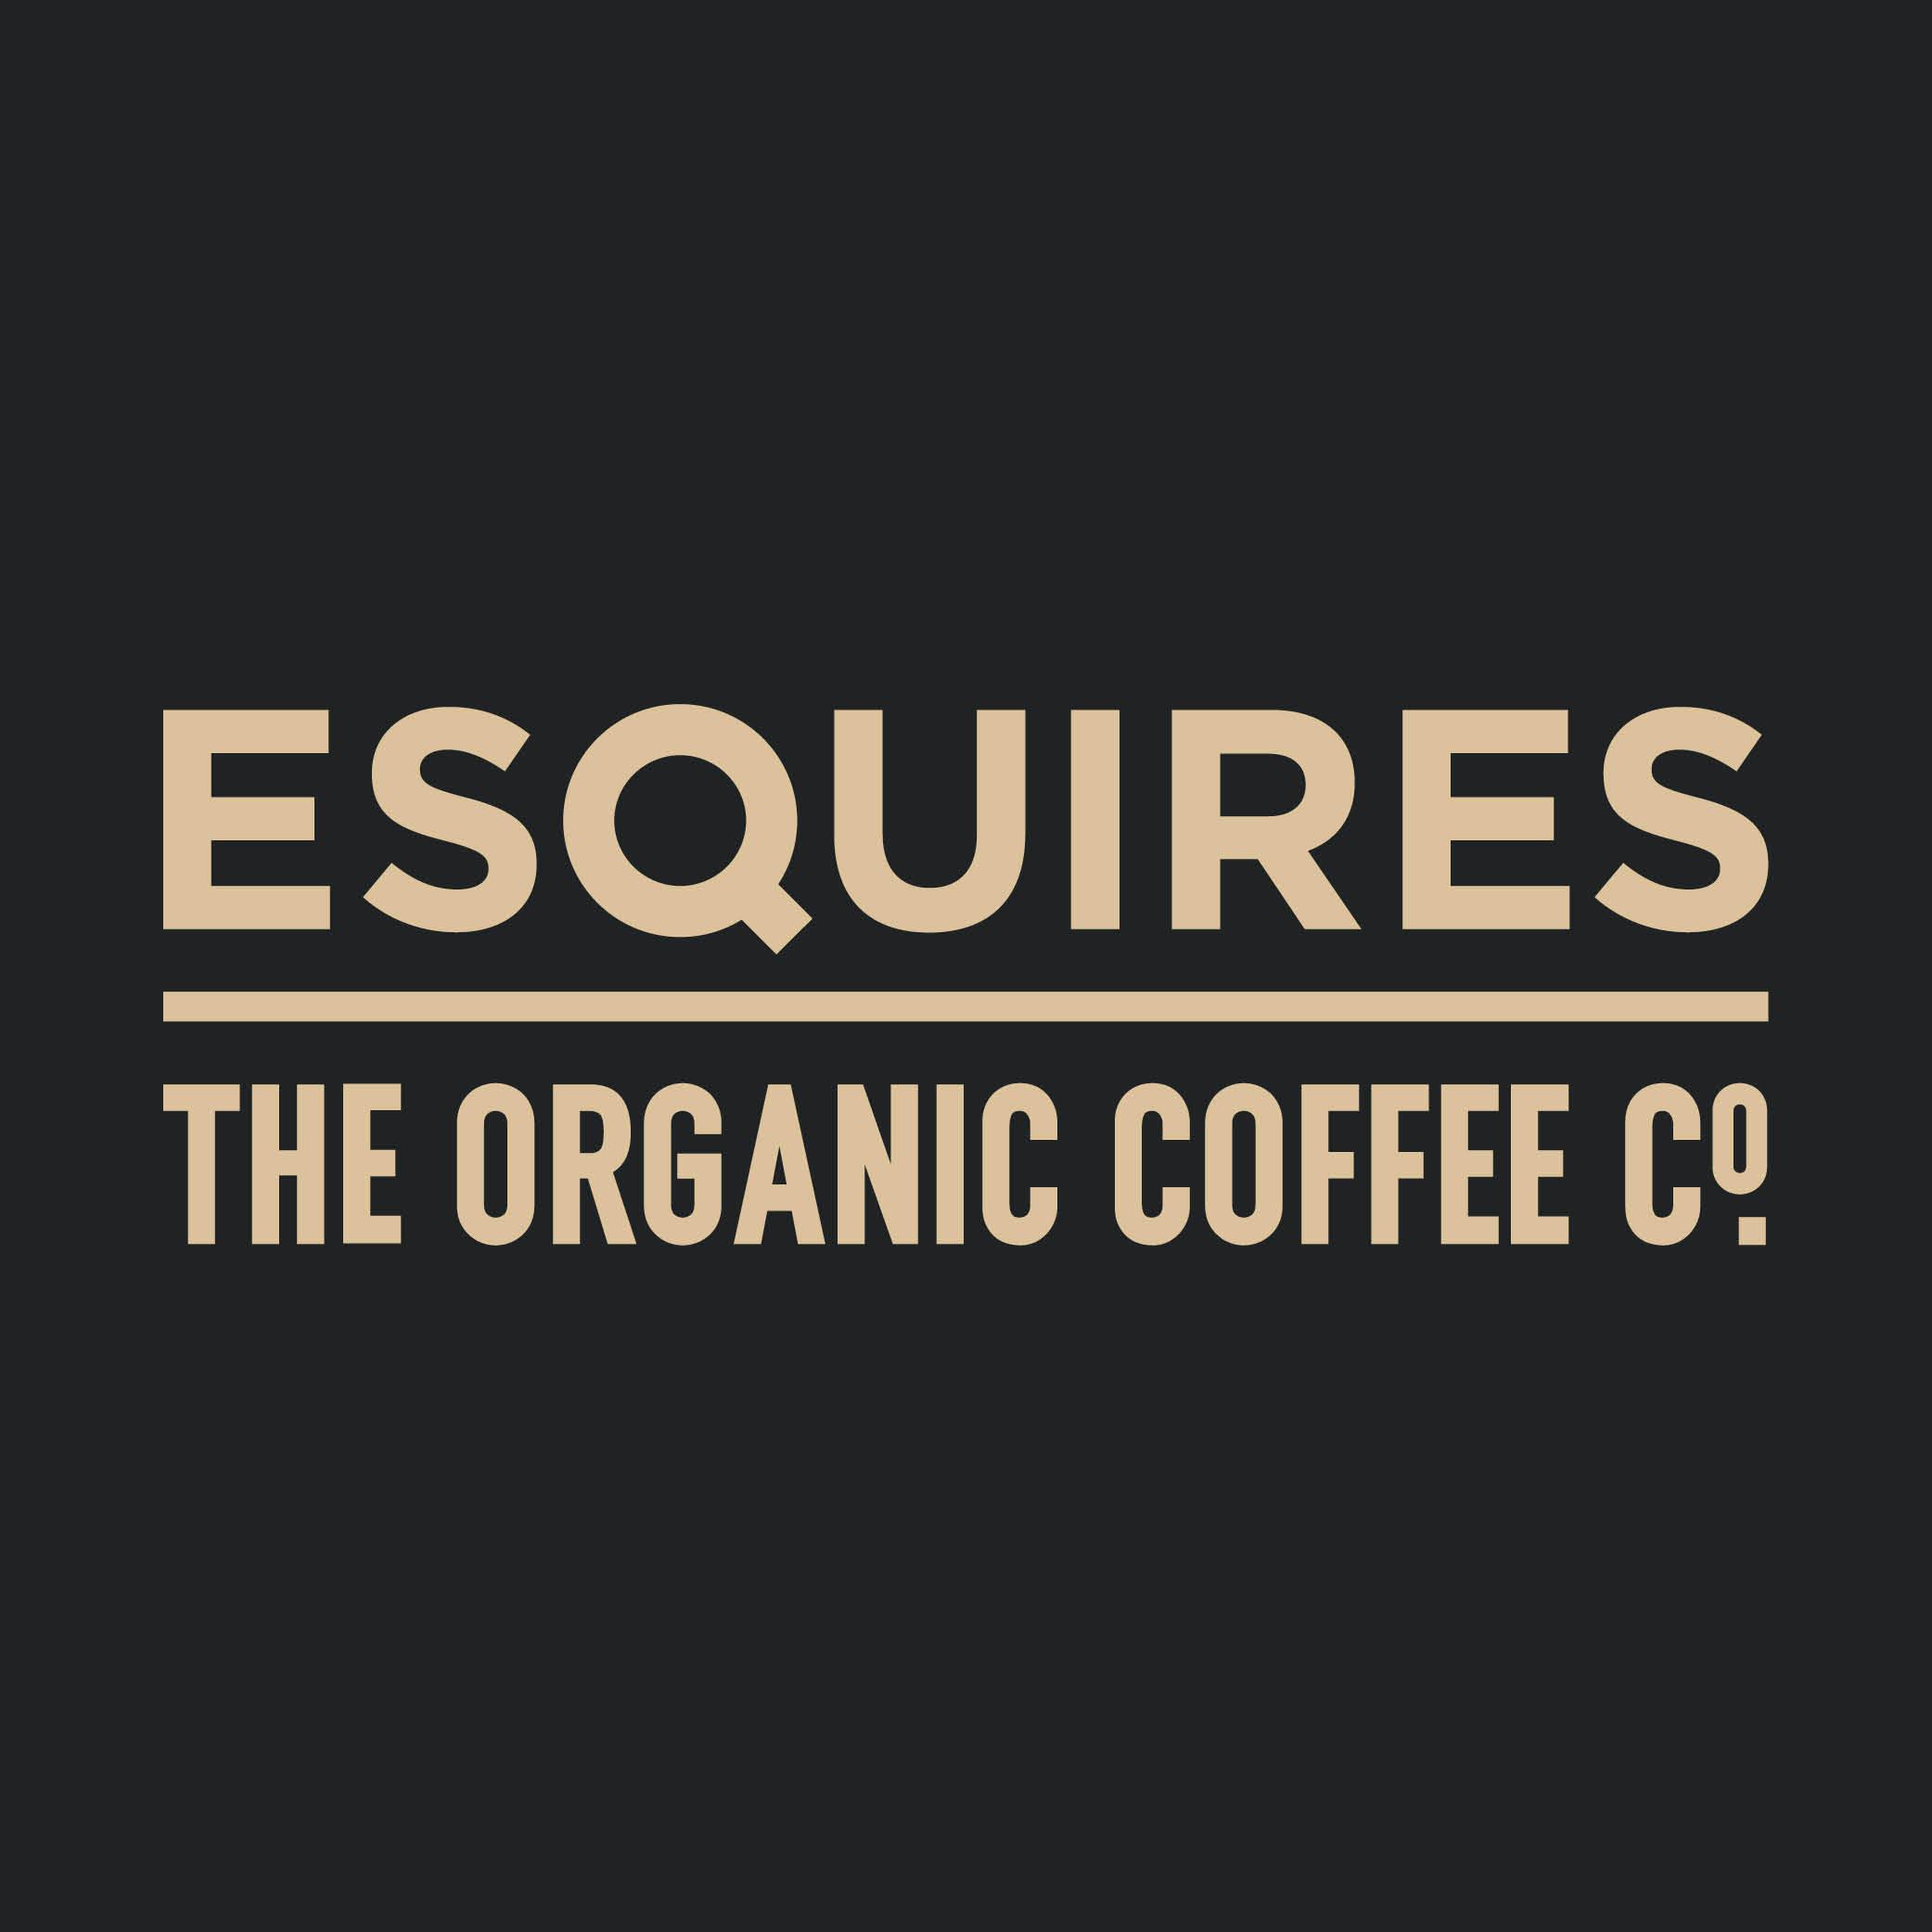 Esquires Coffee Corby Corby 01280 852021